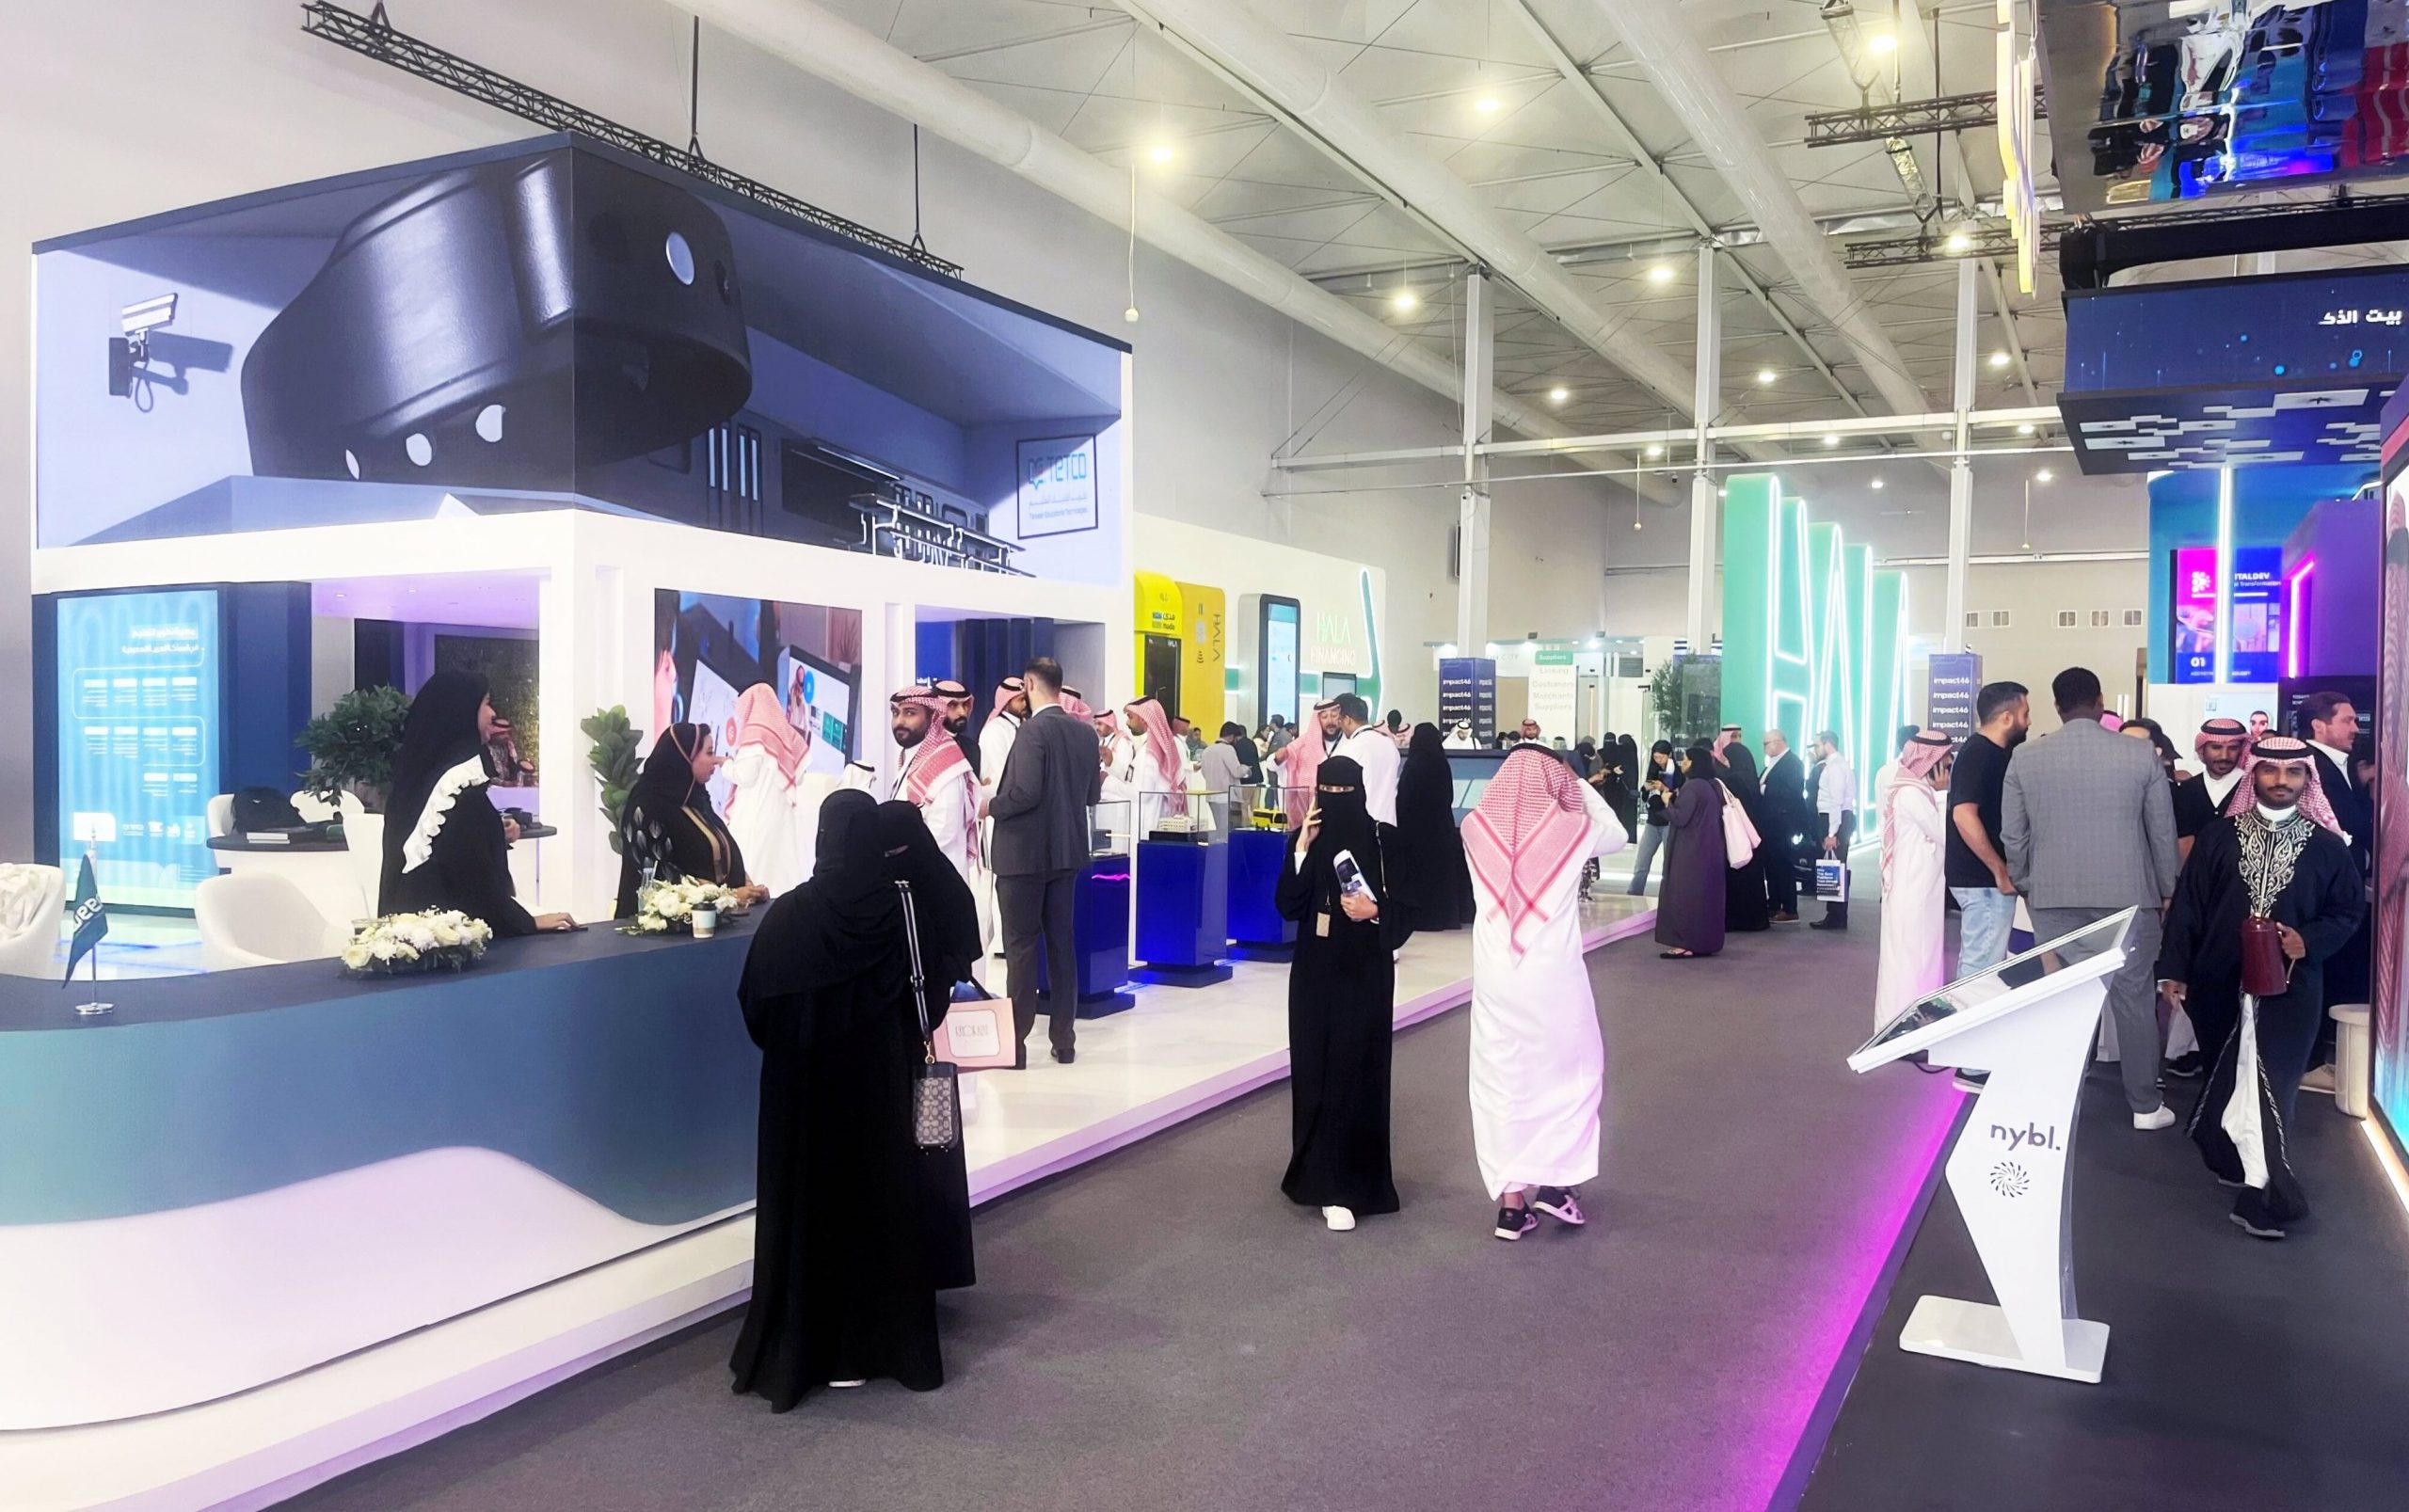 A group of people attending LEAP one of the major events in Saudi illustrating the focus on the Saudi Technology Sector